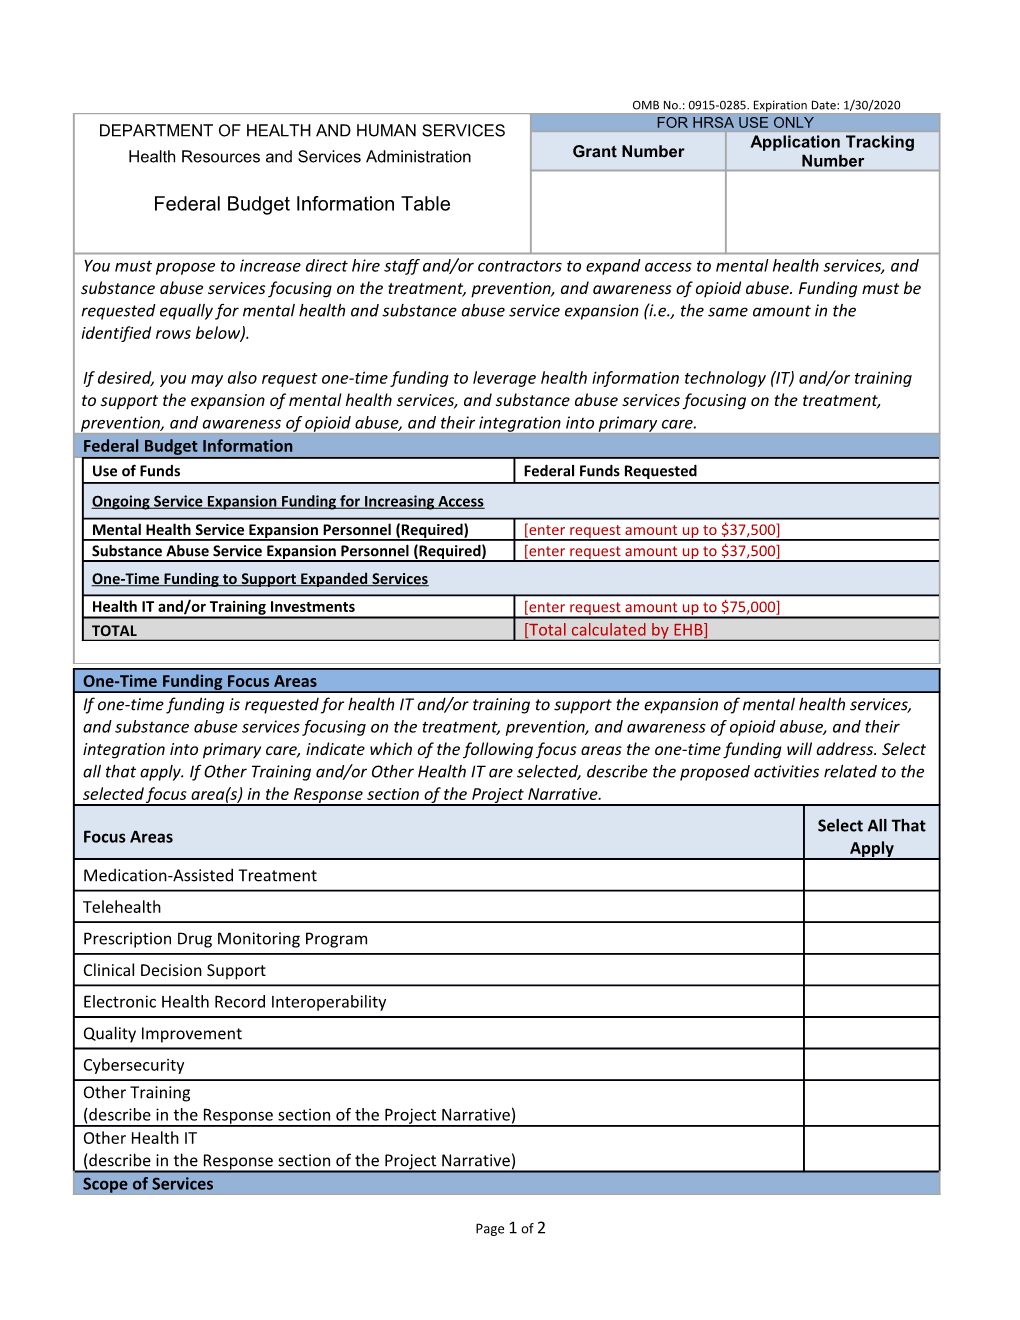 Federal Budget Information Table Form